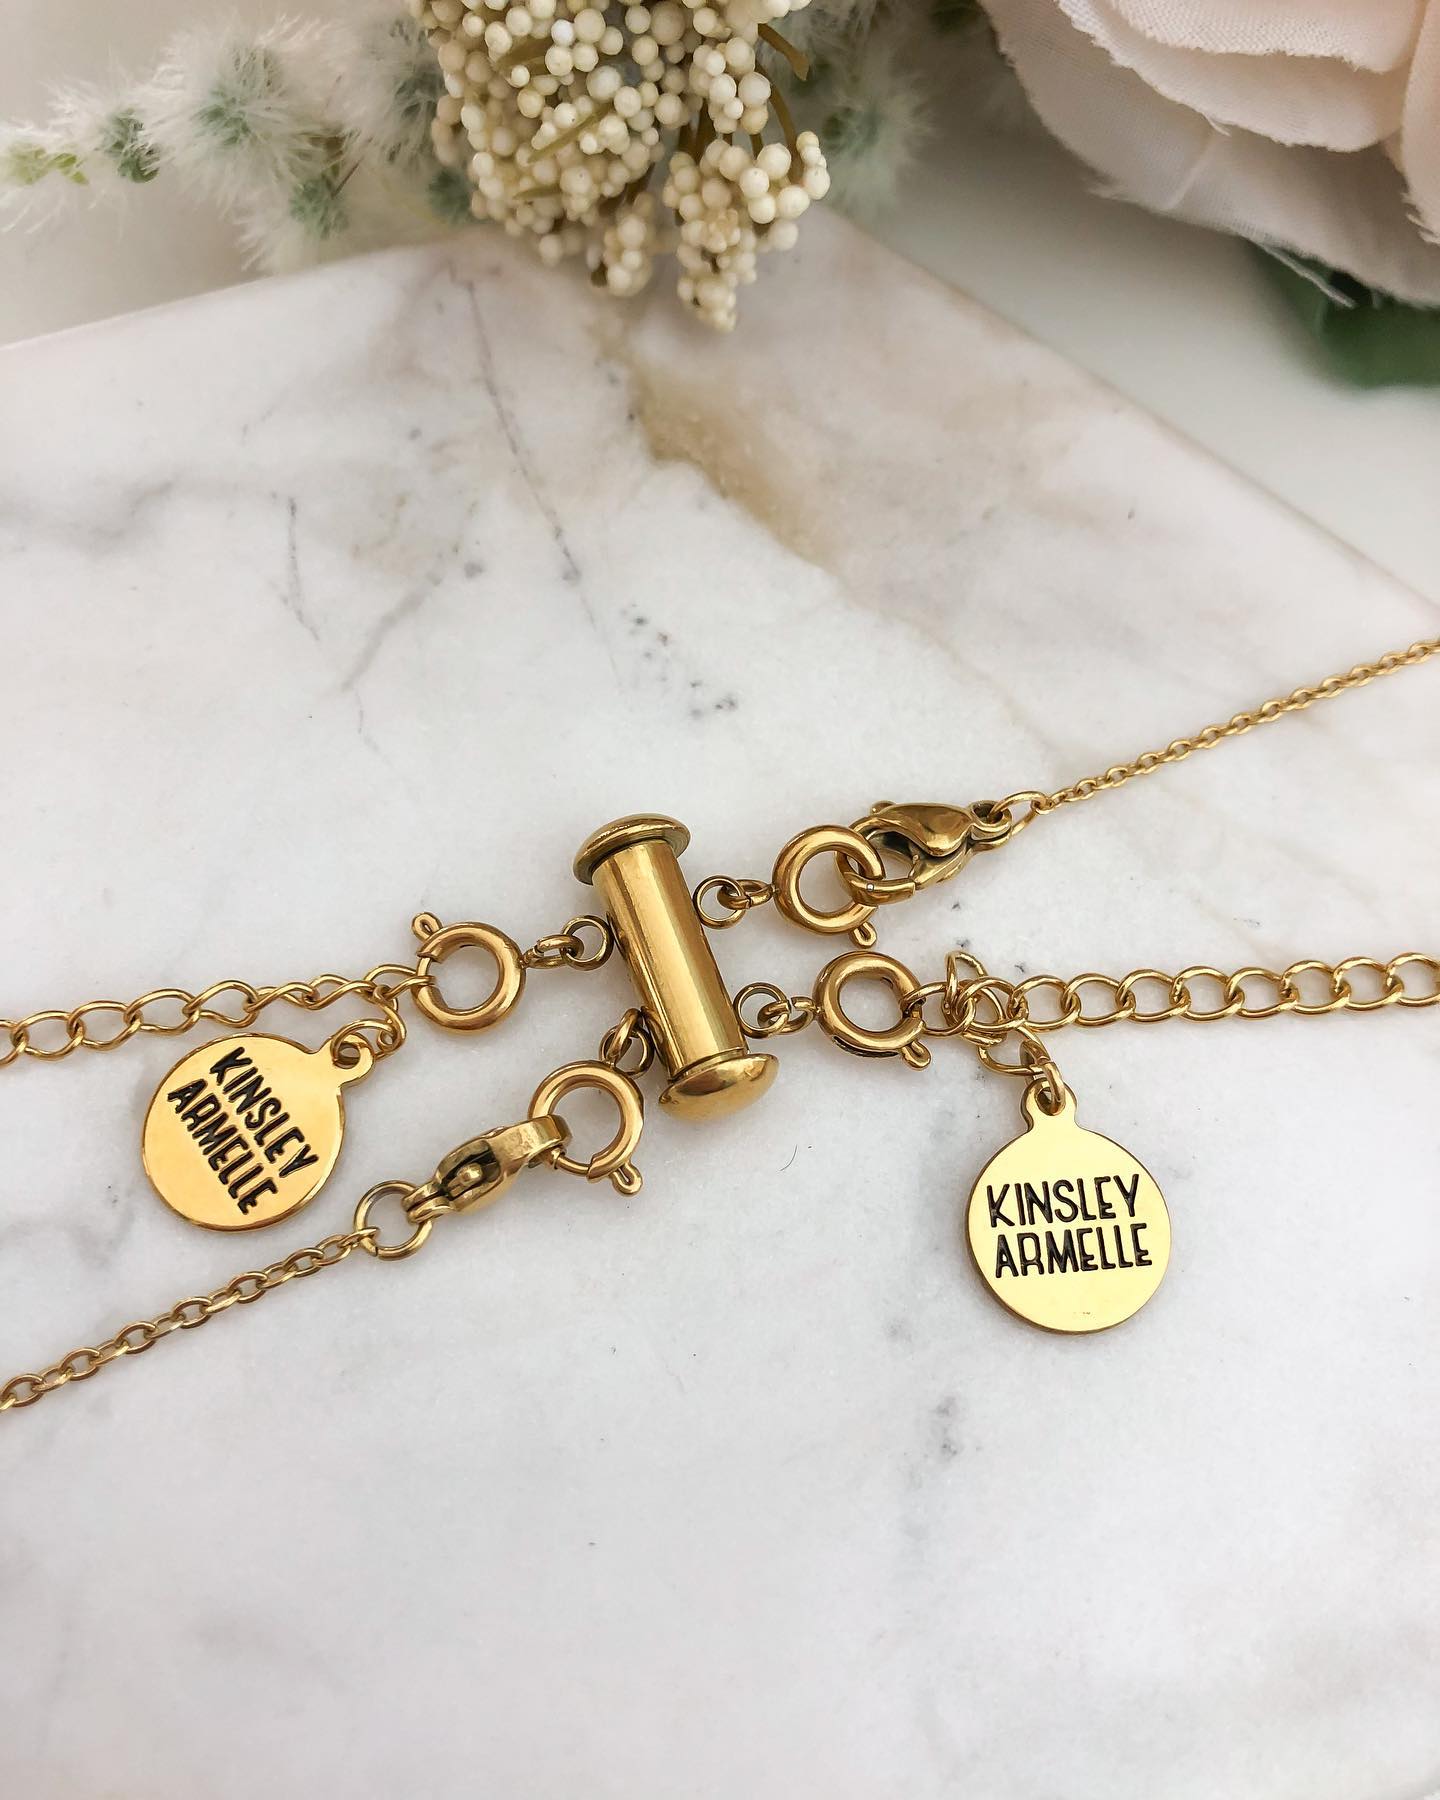 18K Gold Plated Necklace Layering Clasp | 3 Layered Magnetic Necklace  Separator | Stainless Steel Gold Plated Necklace Clasp for Layering | Layered  Necklace Spacer for Stackable Chain with Faith Text : Amazon.co.uk: Fashion